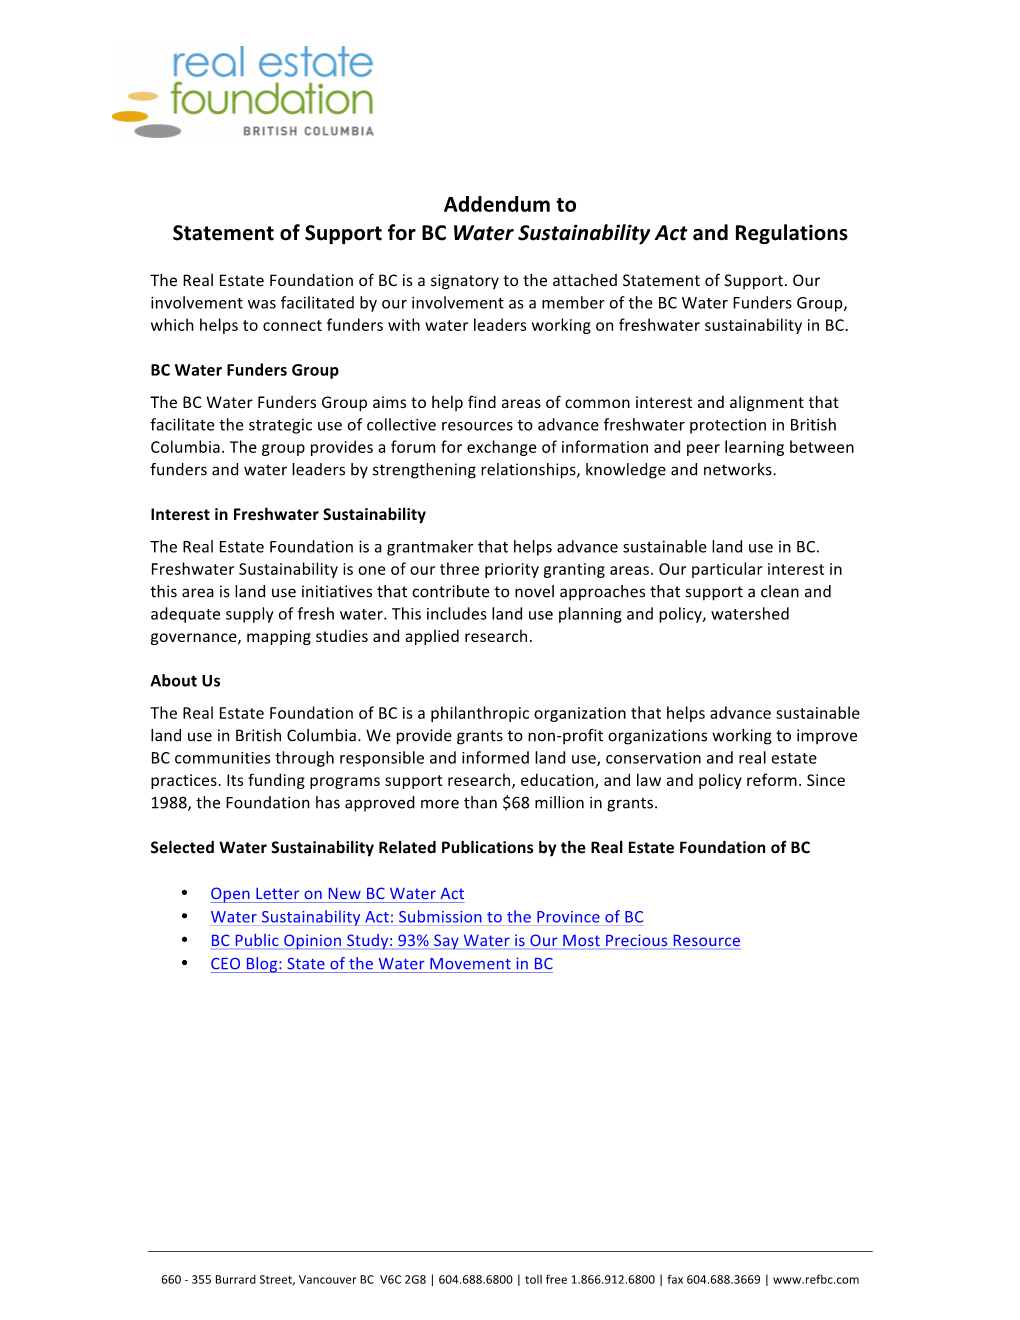 Addendum to Statement of Support for BC Water Sustainability Act and Regulations